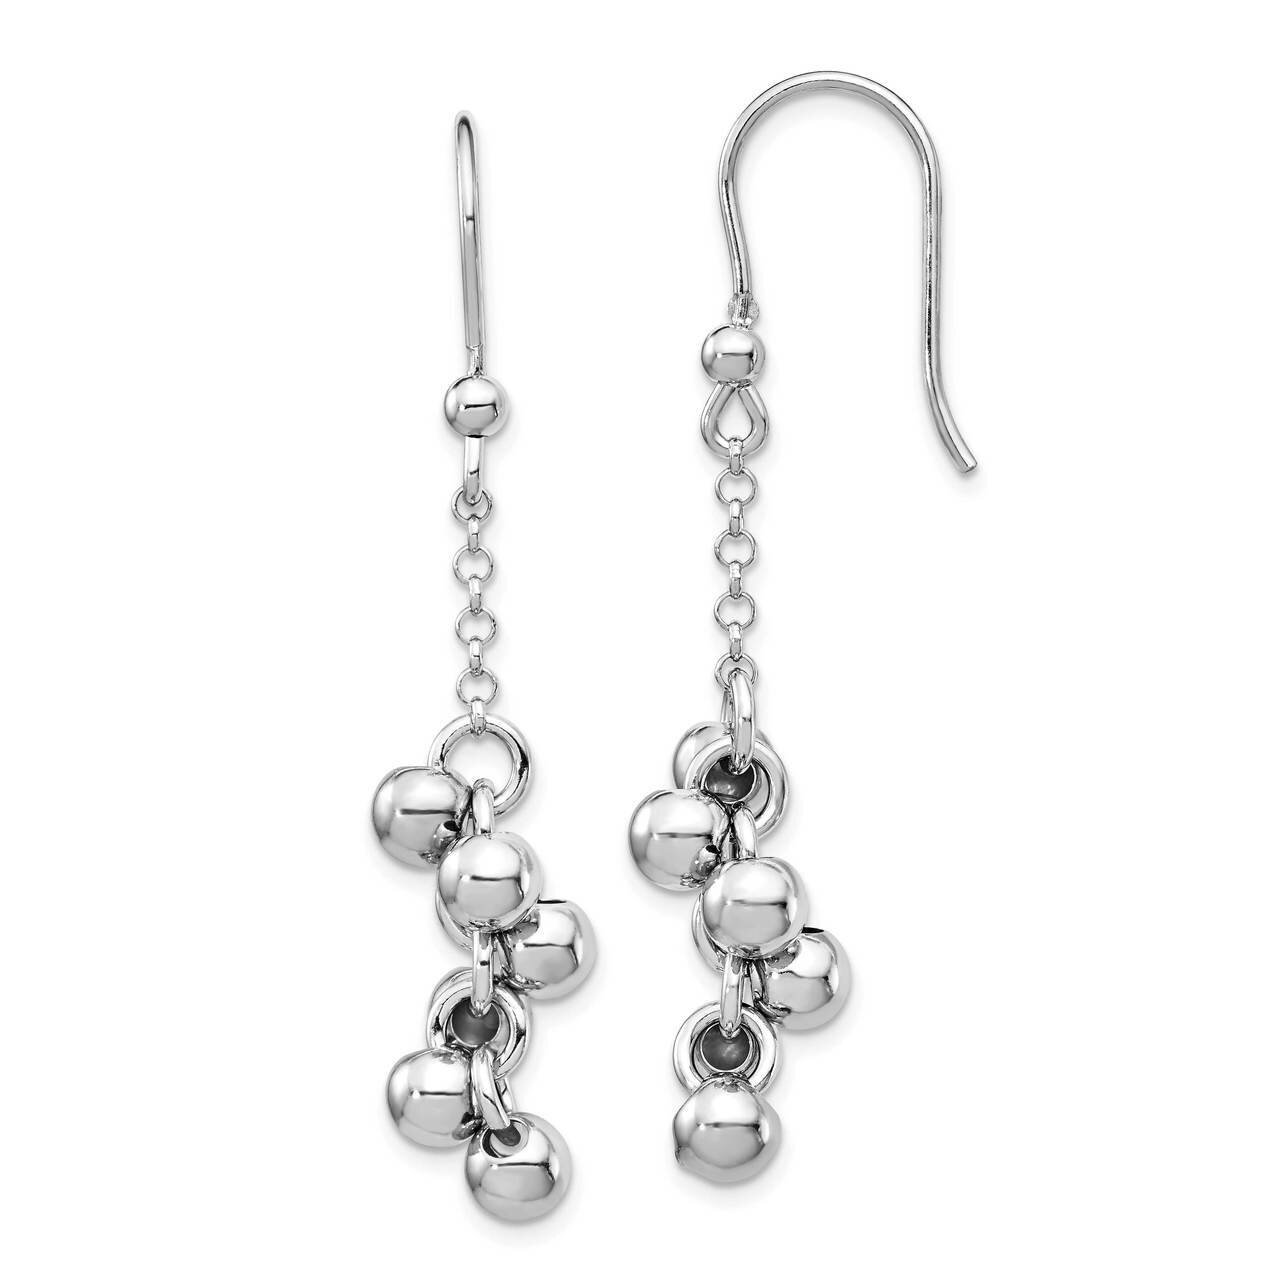 Beads Dangle Earrings Sterling Silver Rhodium-plated QE14405